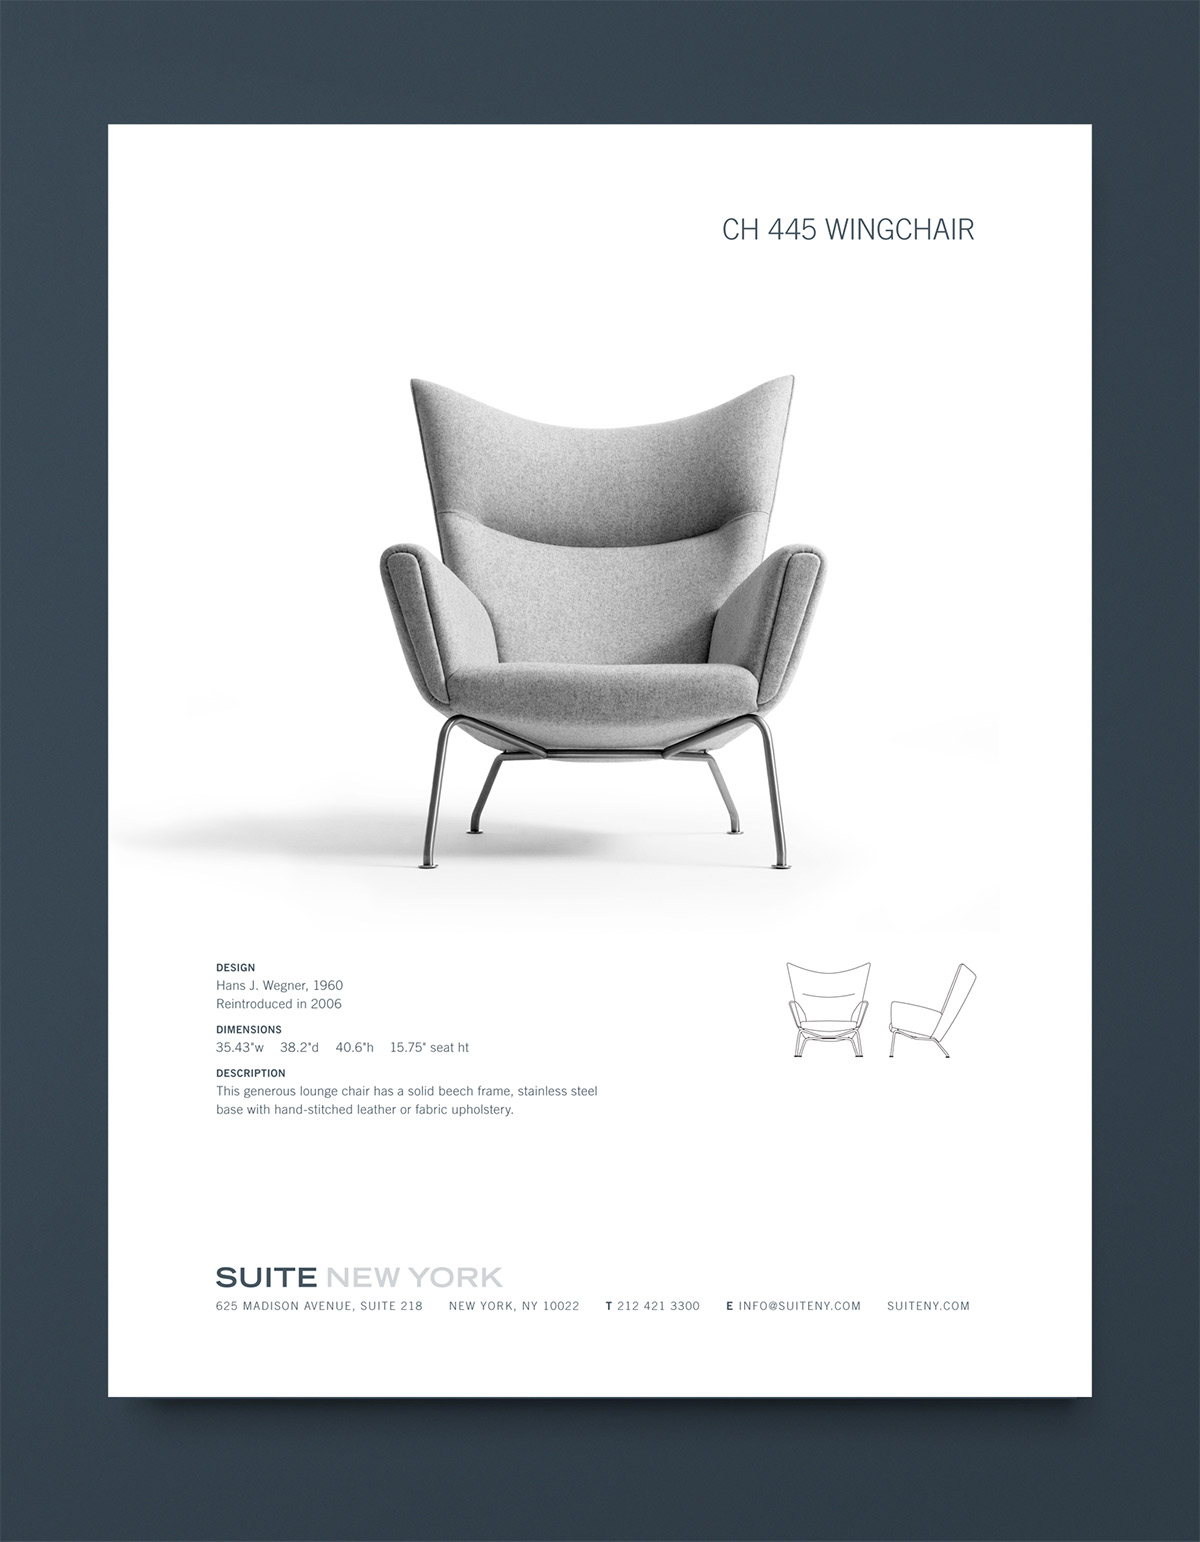 Suite NY Catalog Wingchair